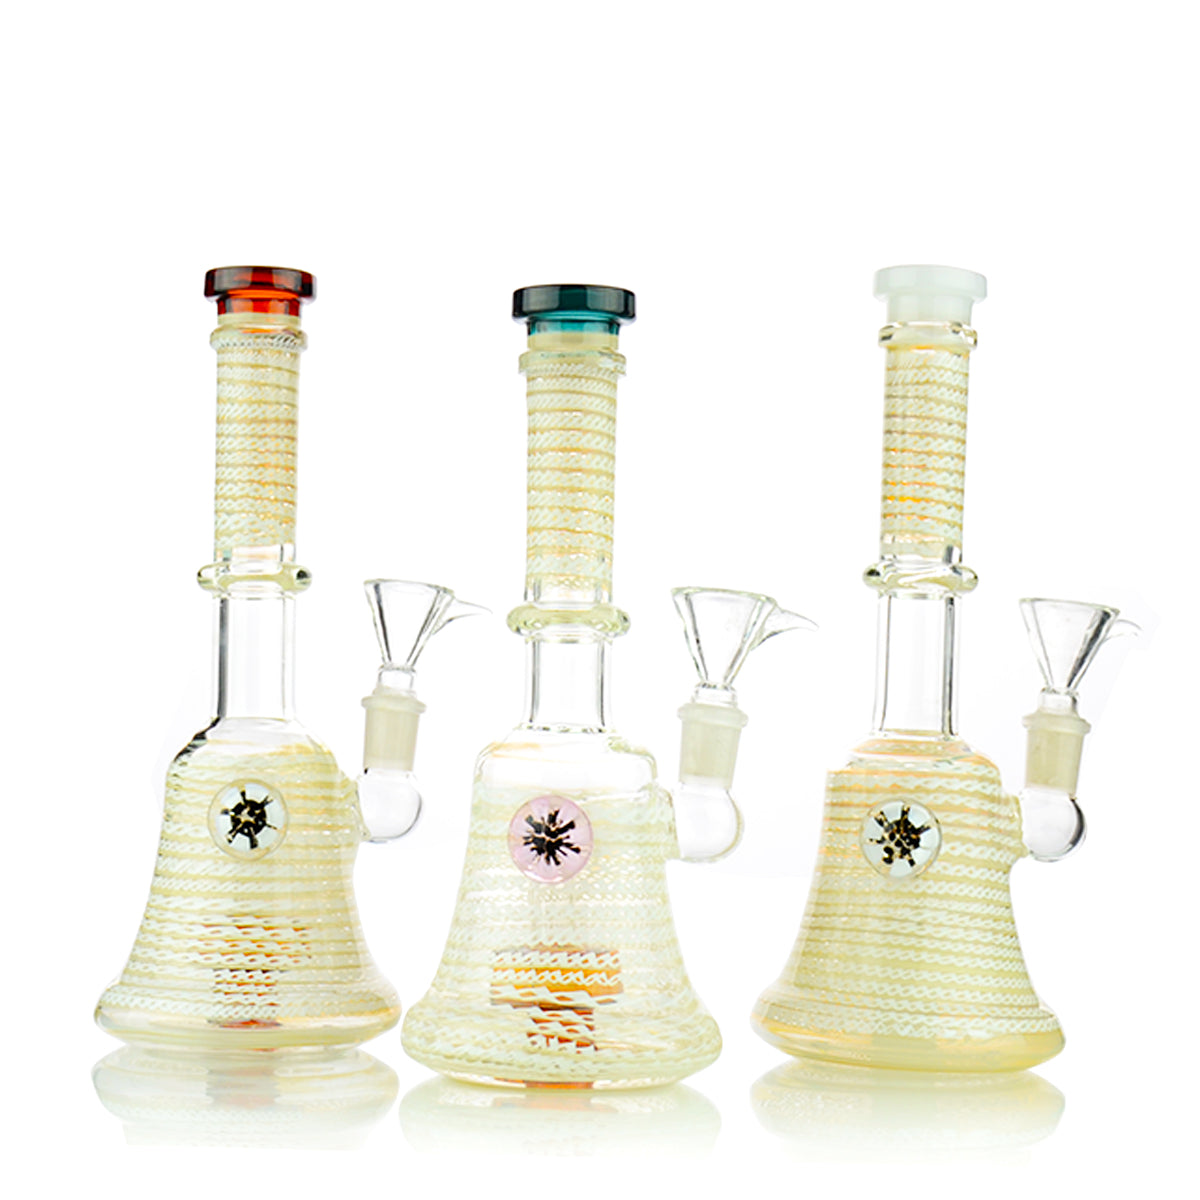 9" White Bong Twisting Art with Locket 14mm Male Bowl Included Approx 350 Grams - LA Wholesale Kings